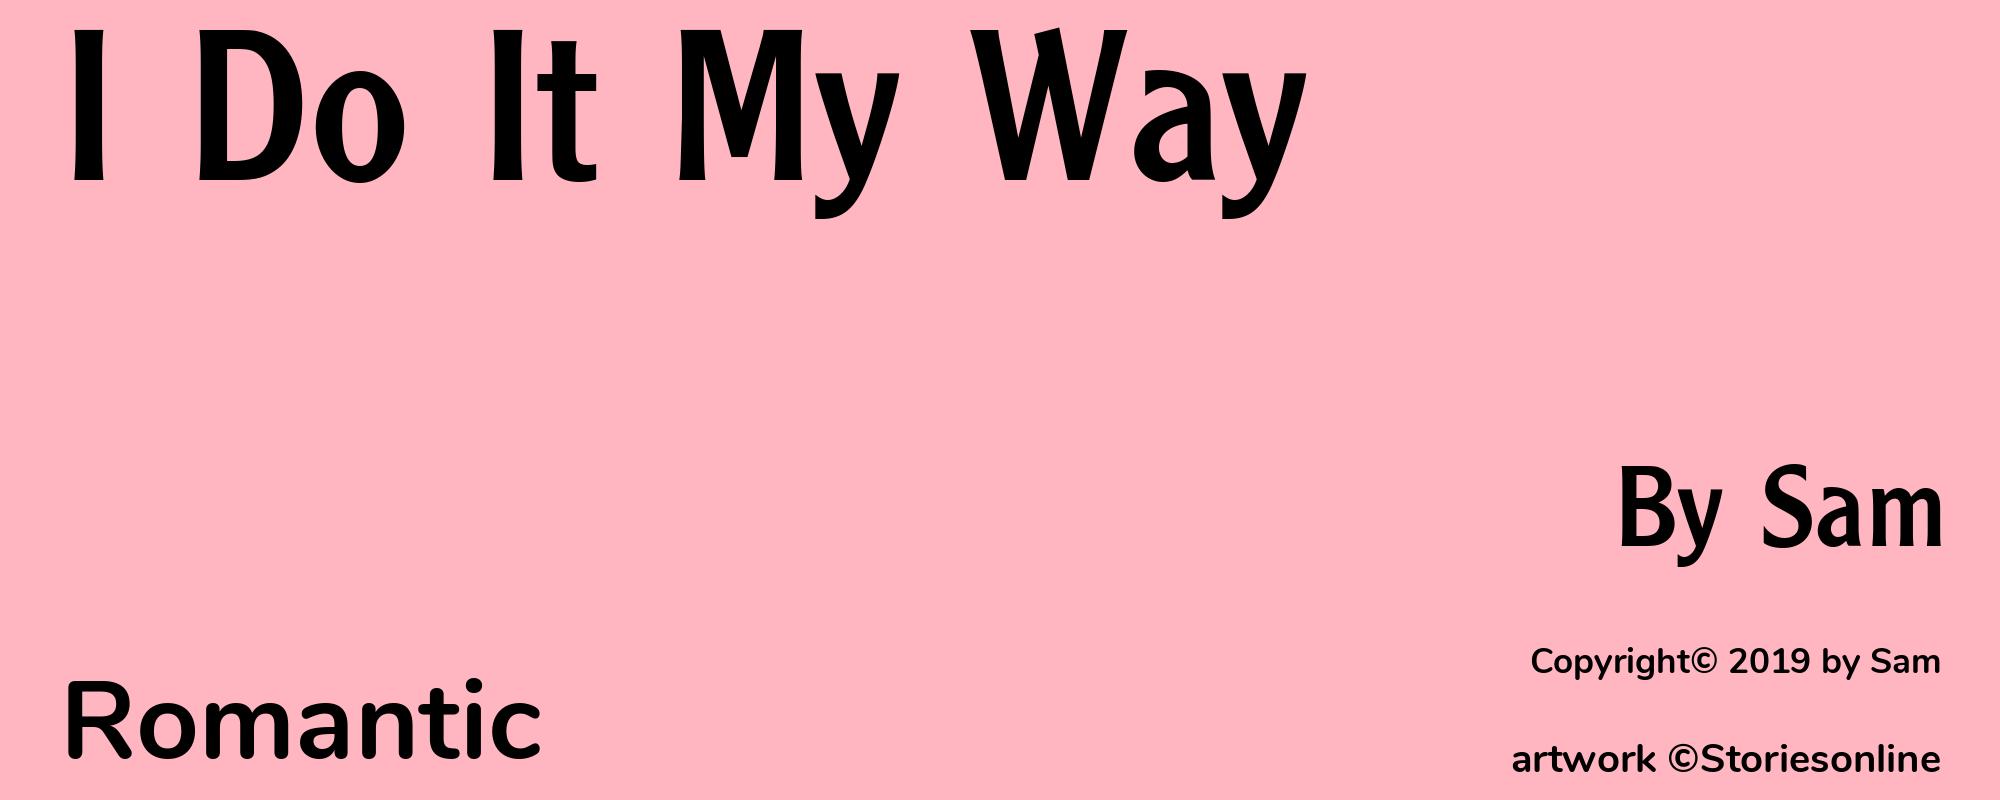 I Do It My Way - Cover